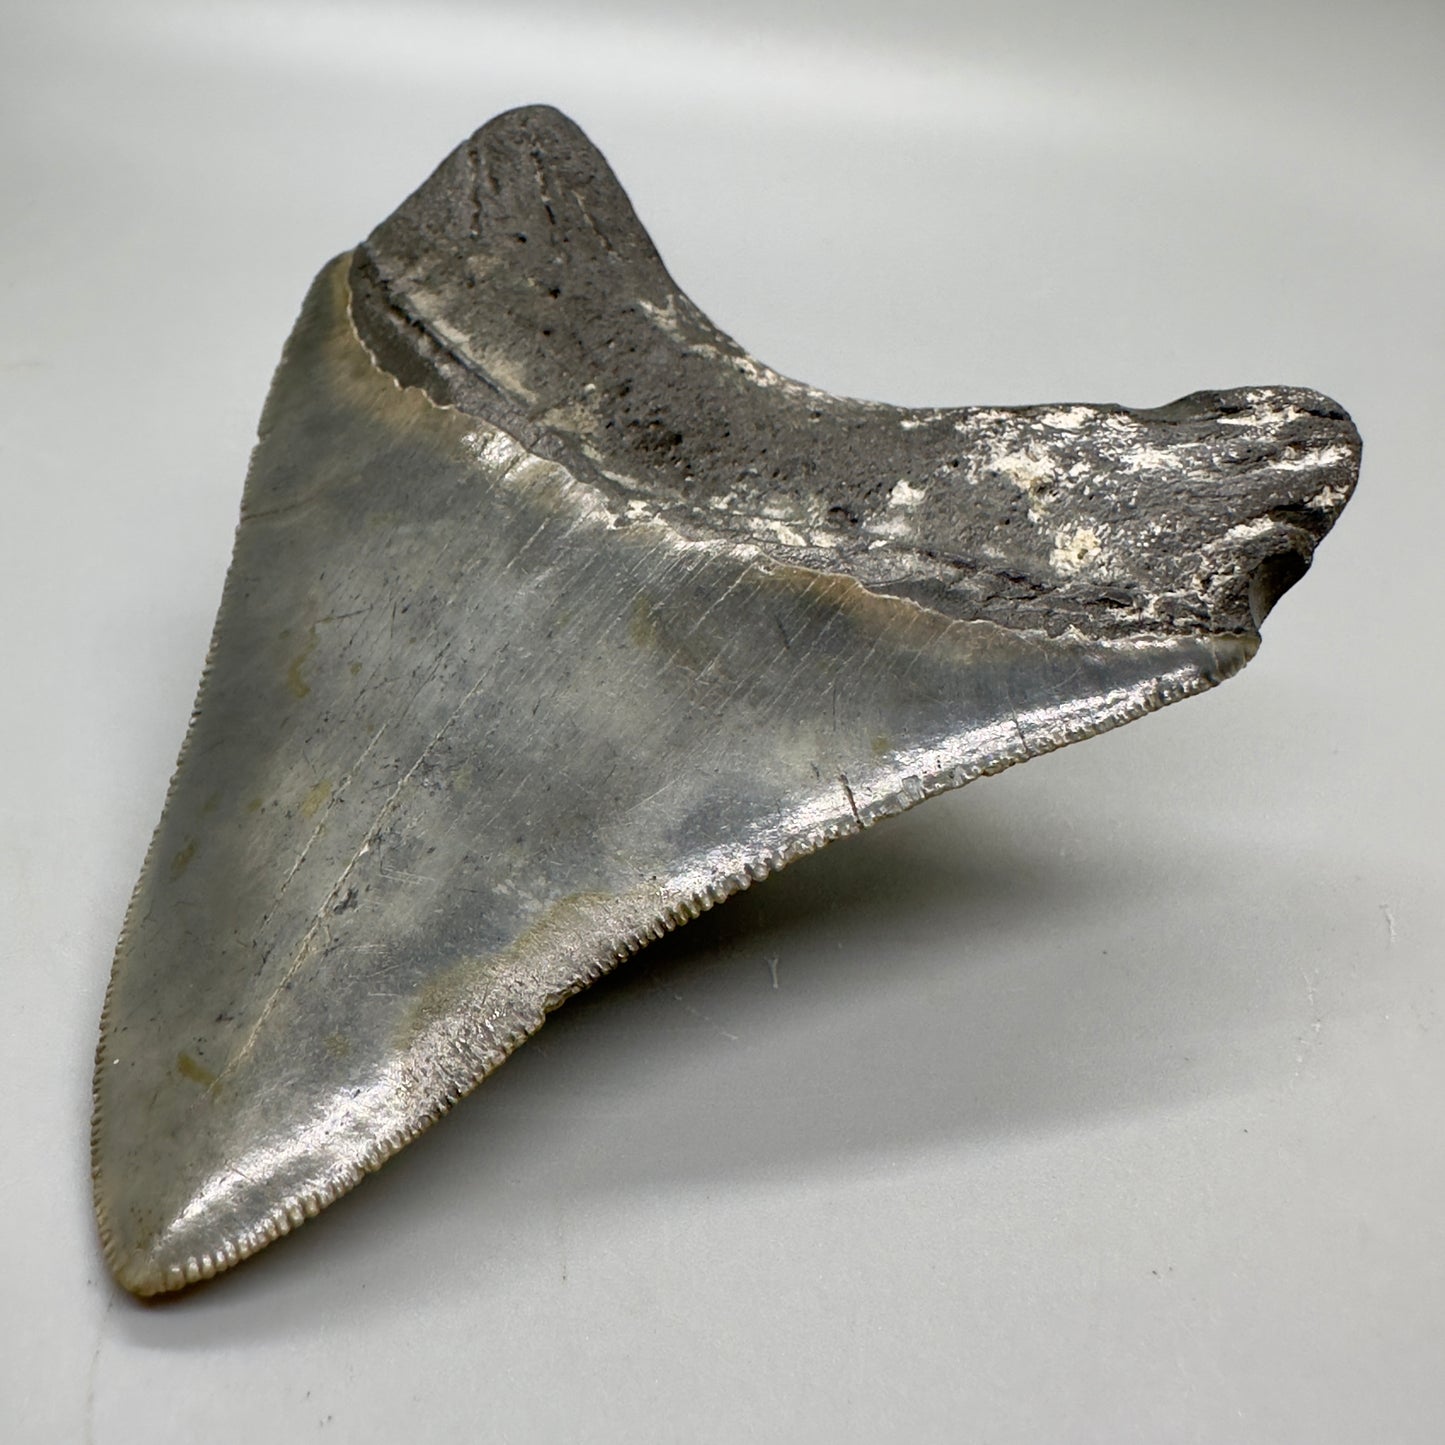 North Carolina Diving Discovery: Colorful, serrated 3.82" Fossil Megalodon Shark Tooth CM4651 - Back right